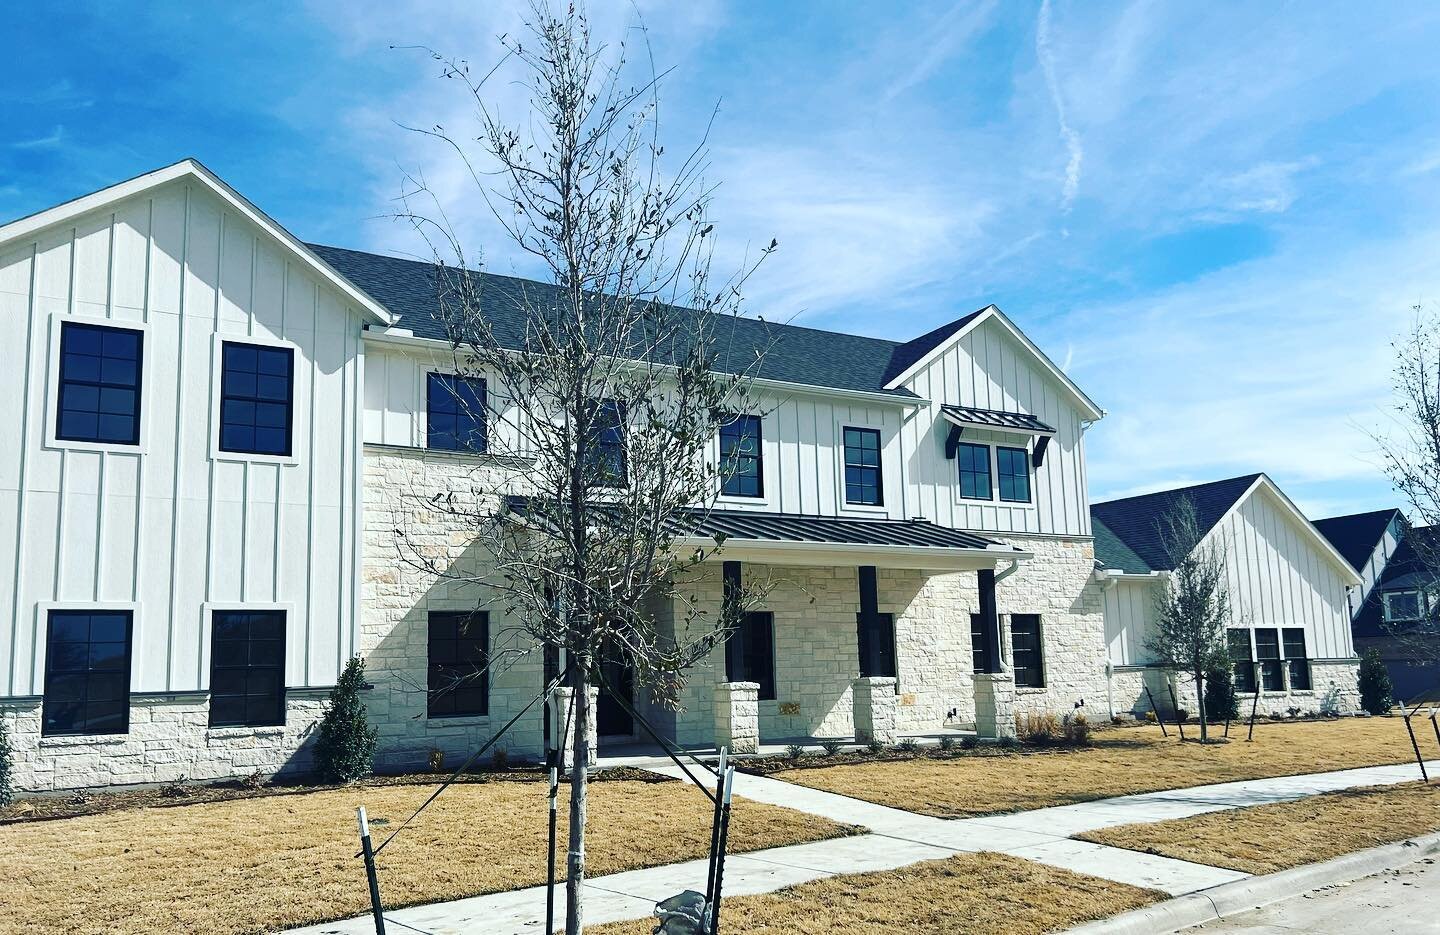 Just Sold in Walsh Ranch!! I loved helping these clients make their move to Fort Worth and build their beautiful custom home with Village Homes! Grateful for friends referrals and such fun clients!! #justsold #texasrealestate